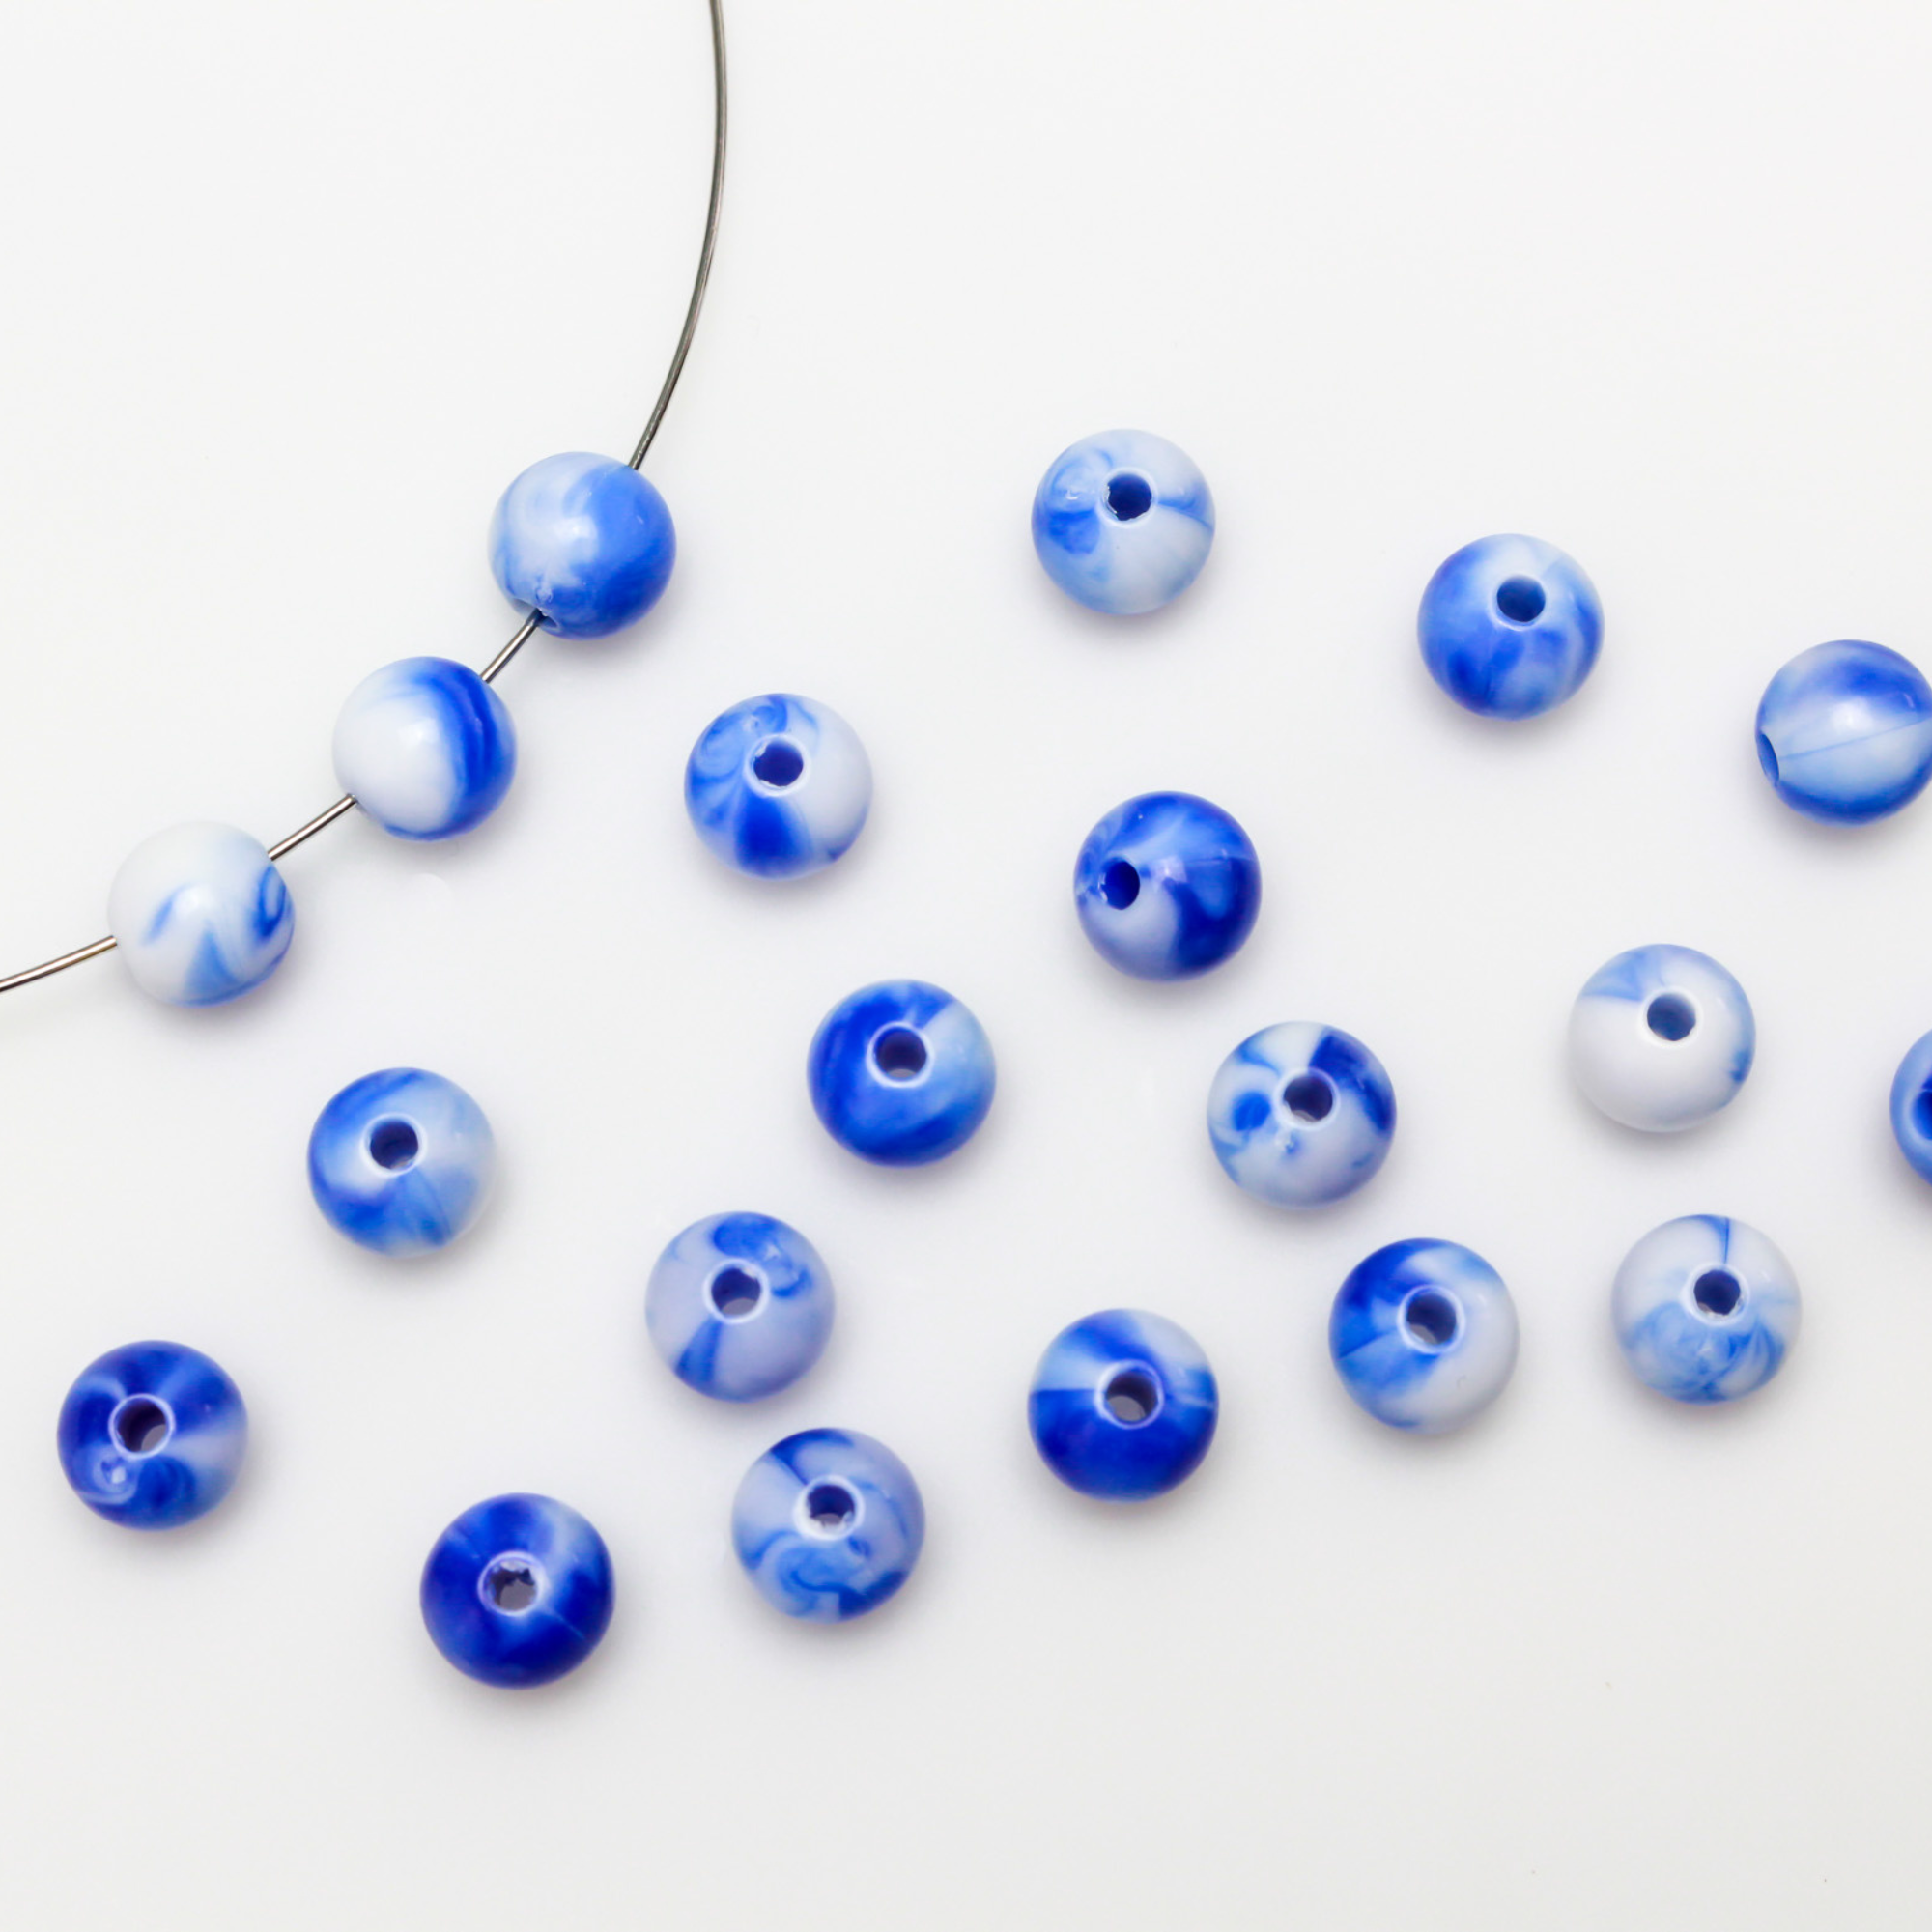 Round blue and white marbled opaque beads that are 8mm in diameter with a 1.5mm hole size